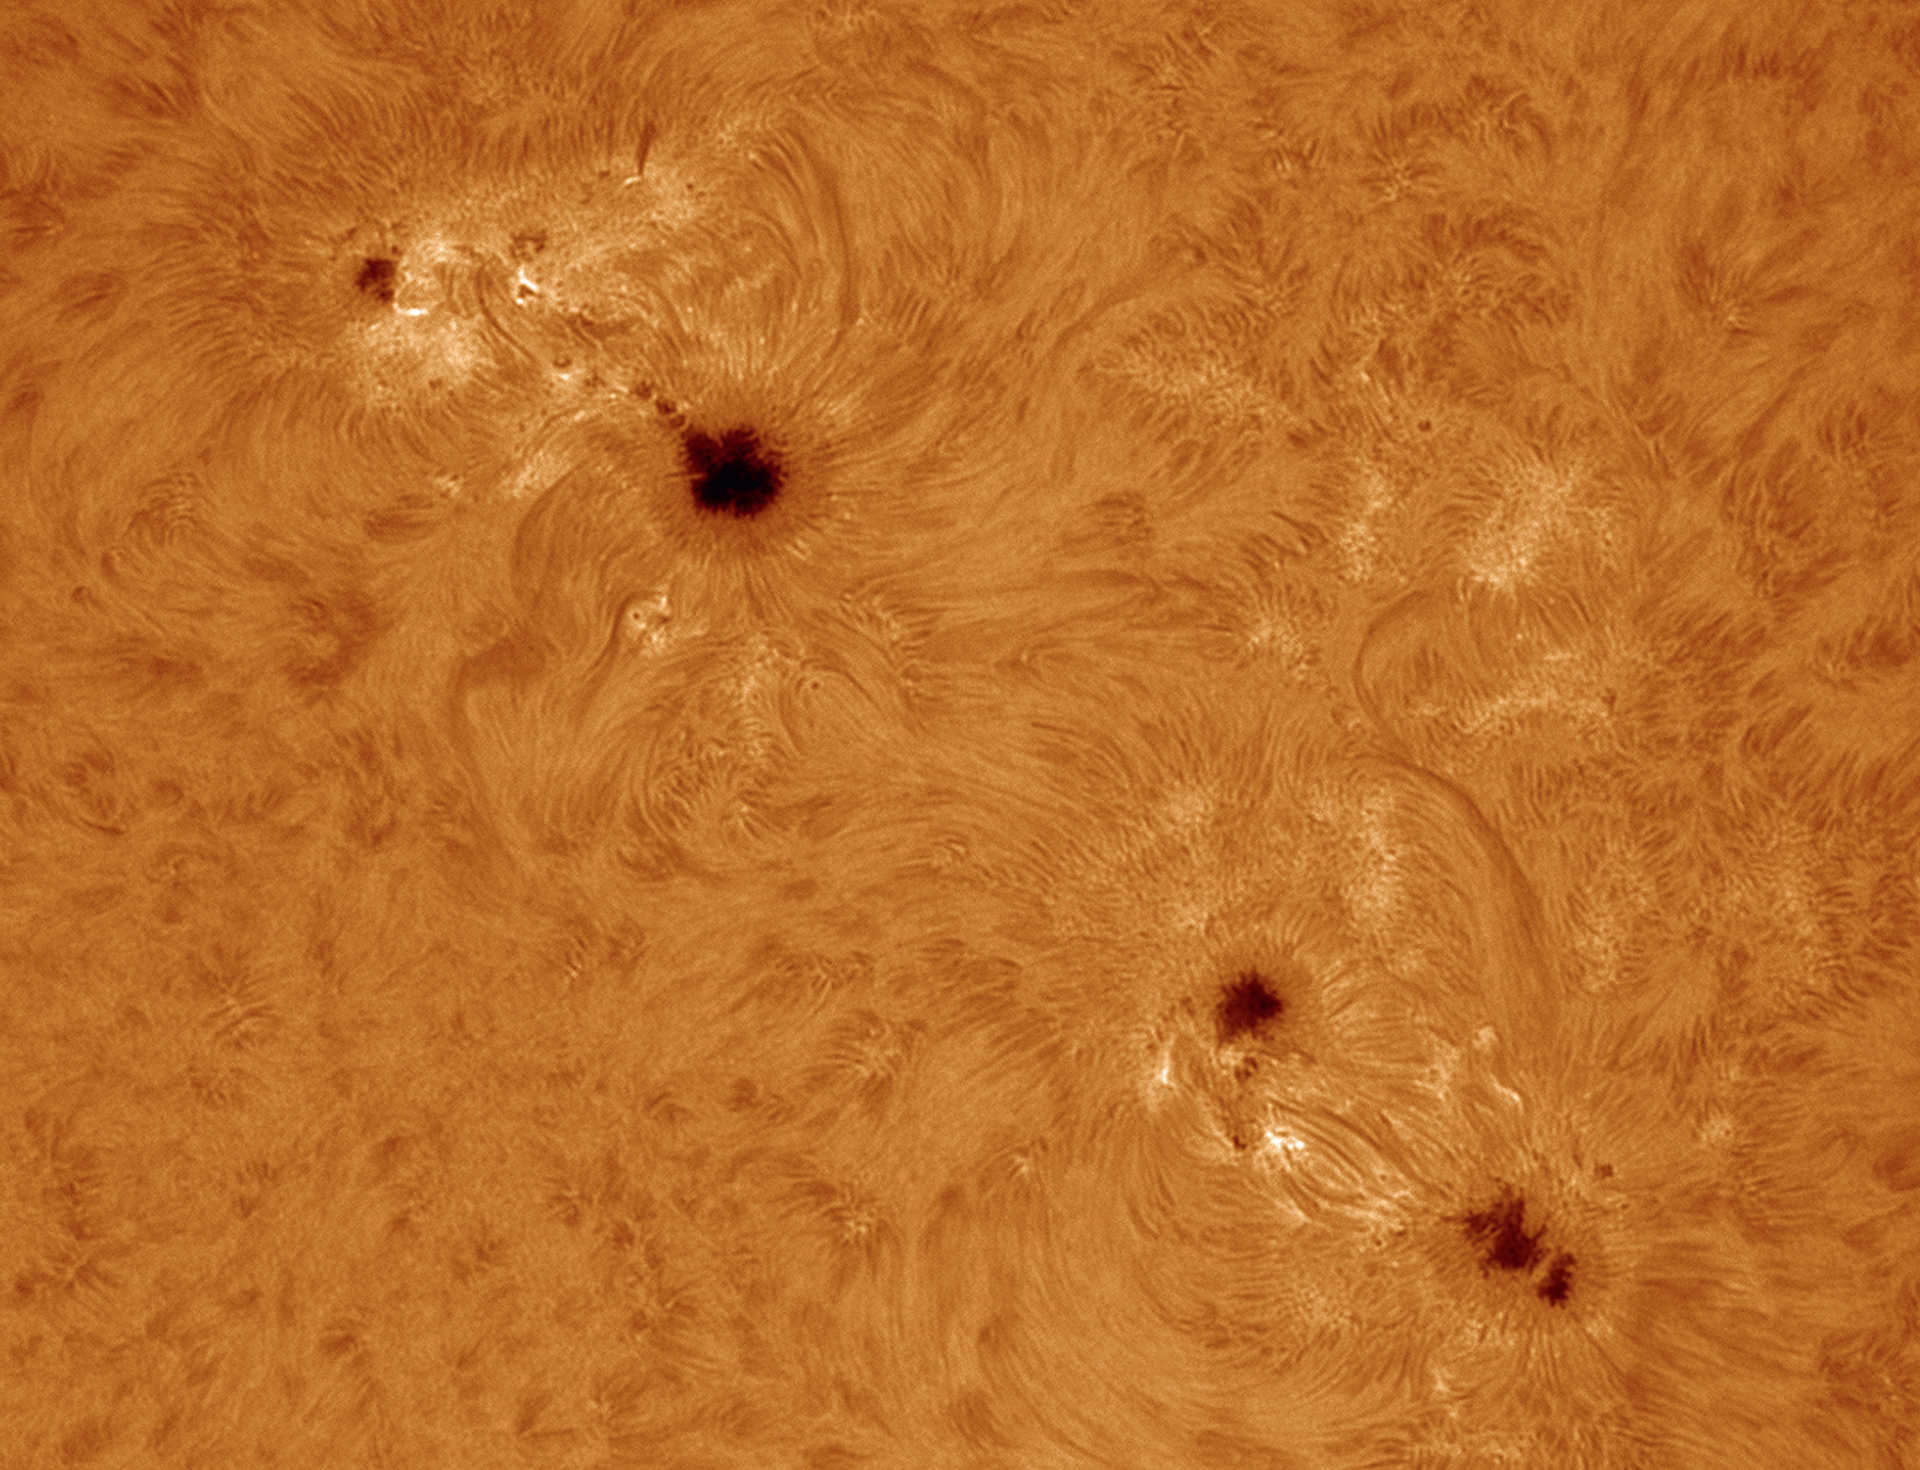 Sunspots in Hα light. Created with a Coronado Solarmax90 filter on a refractor with a focal length of 2000 mm, aperture: 90 mm; uncooled CCD camera; 500 of 2,500 frames processed in AviStack2 and Photoshop. U. Dittler